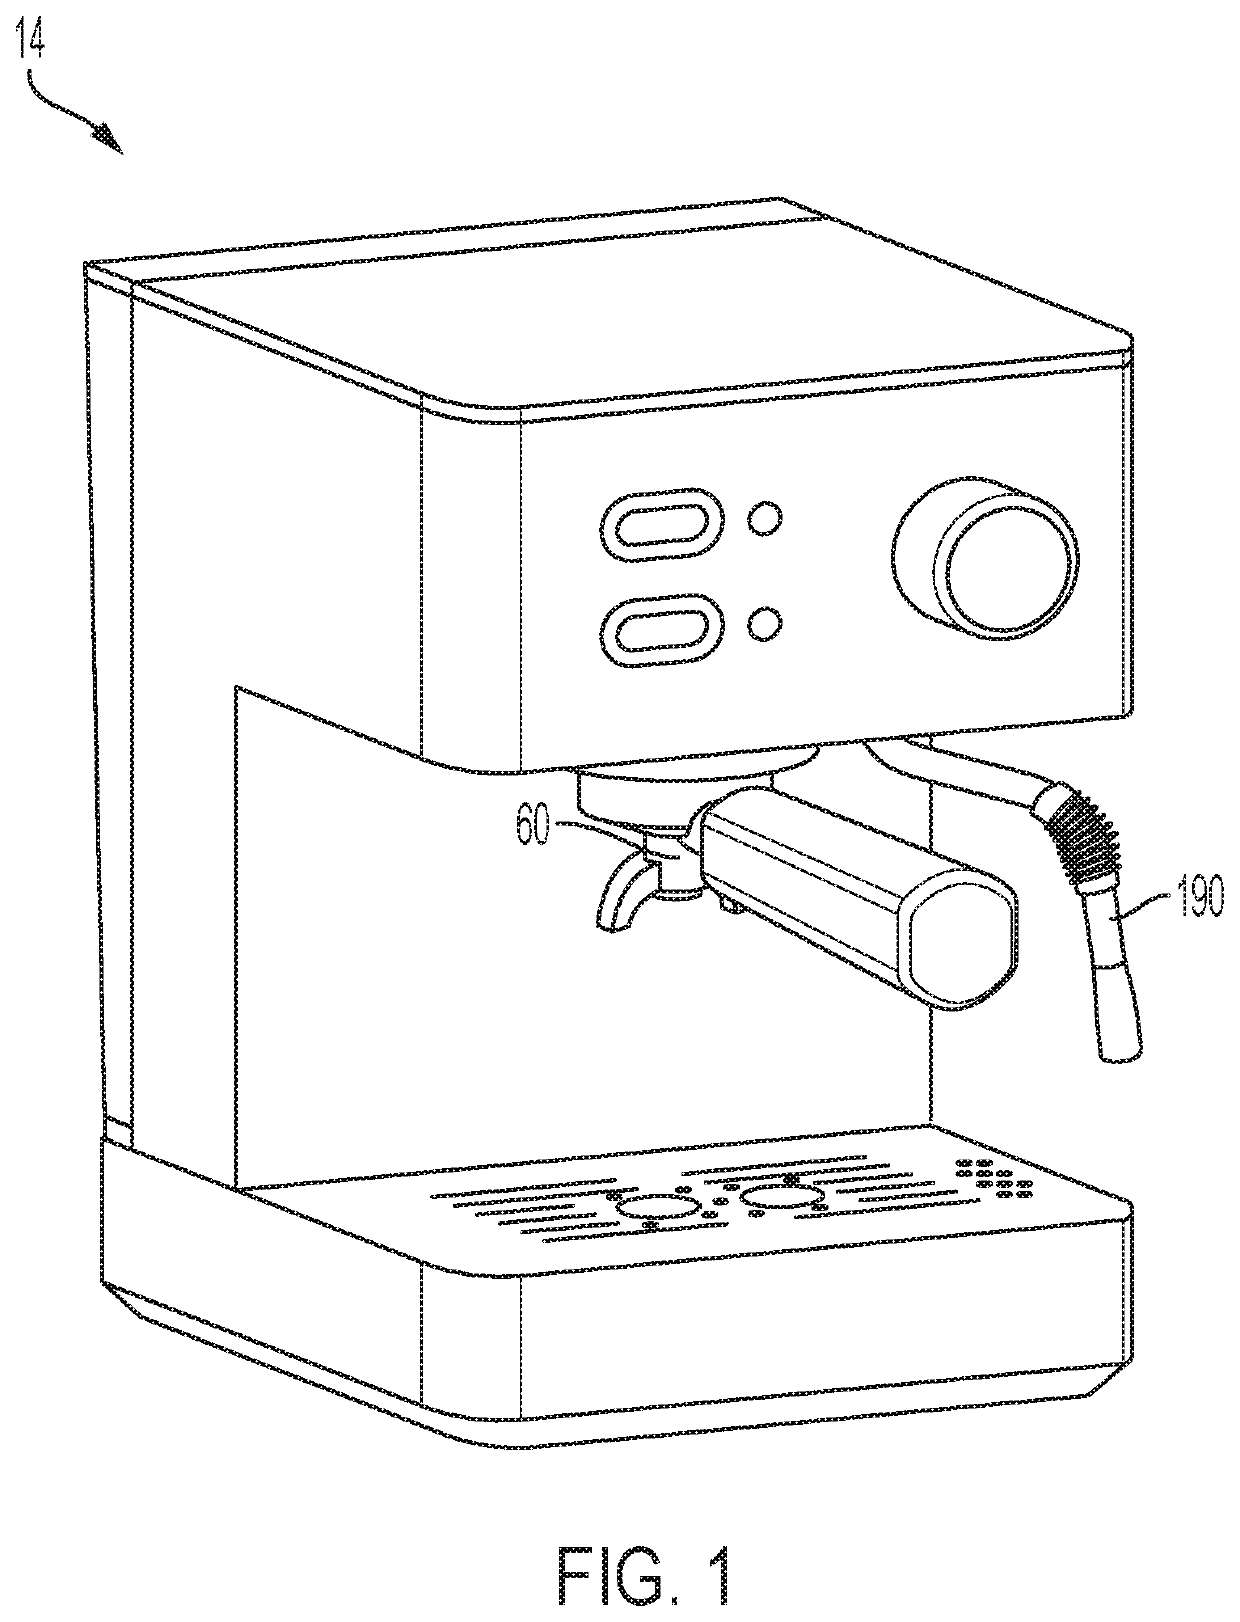 Device for cleaning an espresso machine